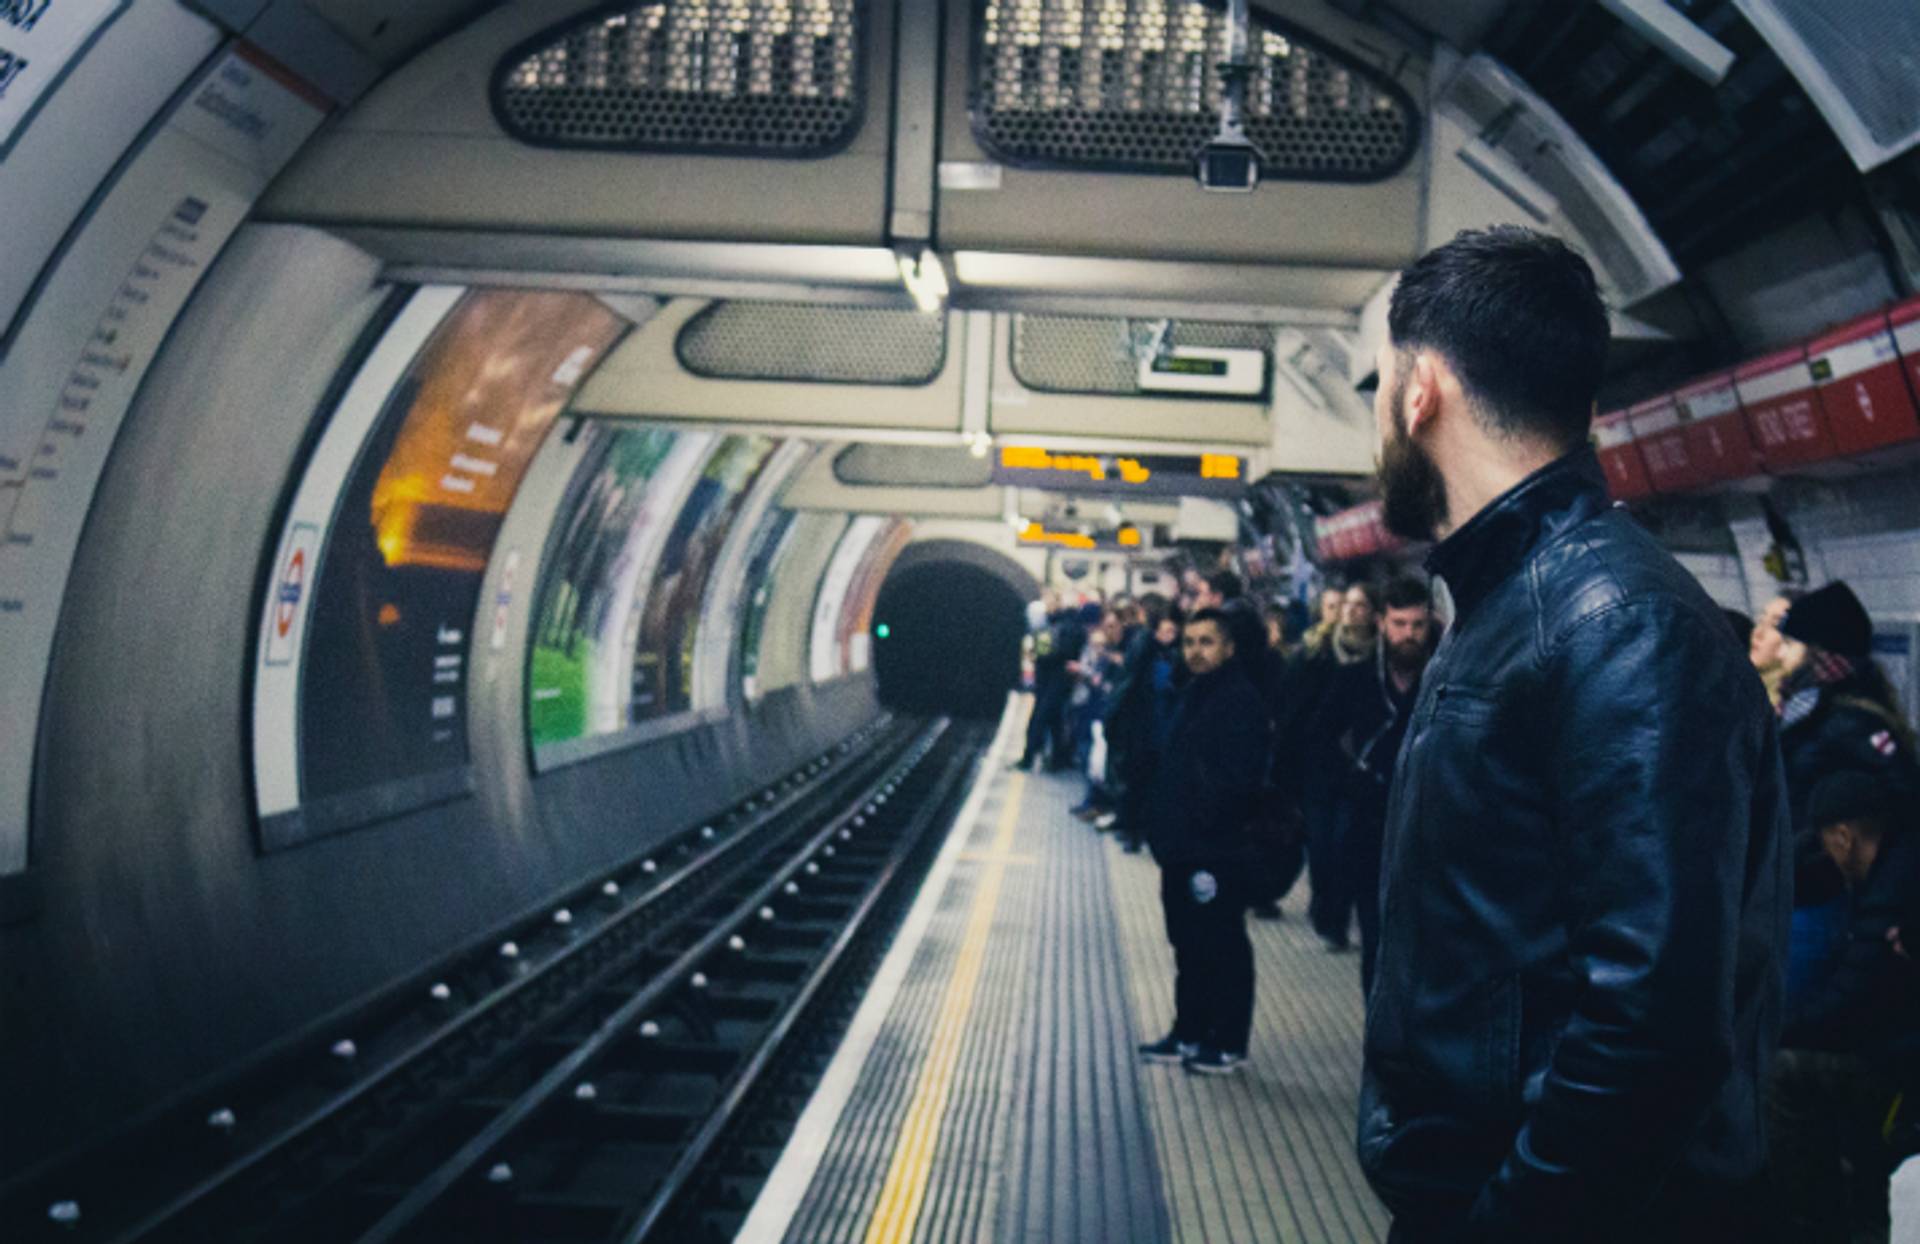 TfL tackles commuting stress with Headspace initiative